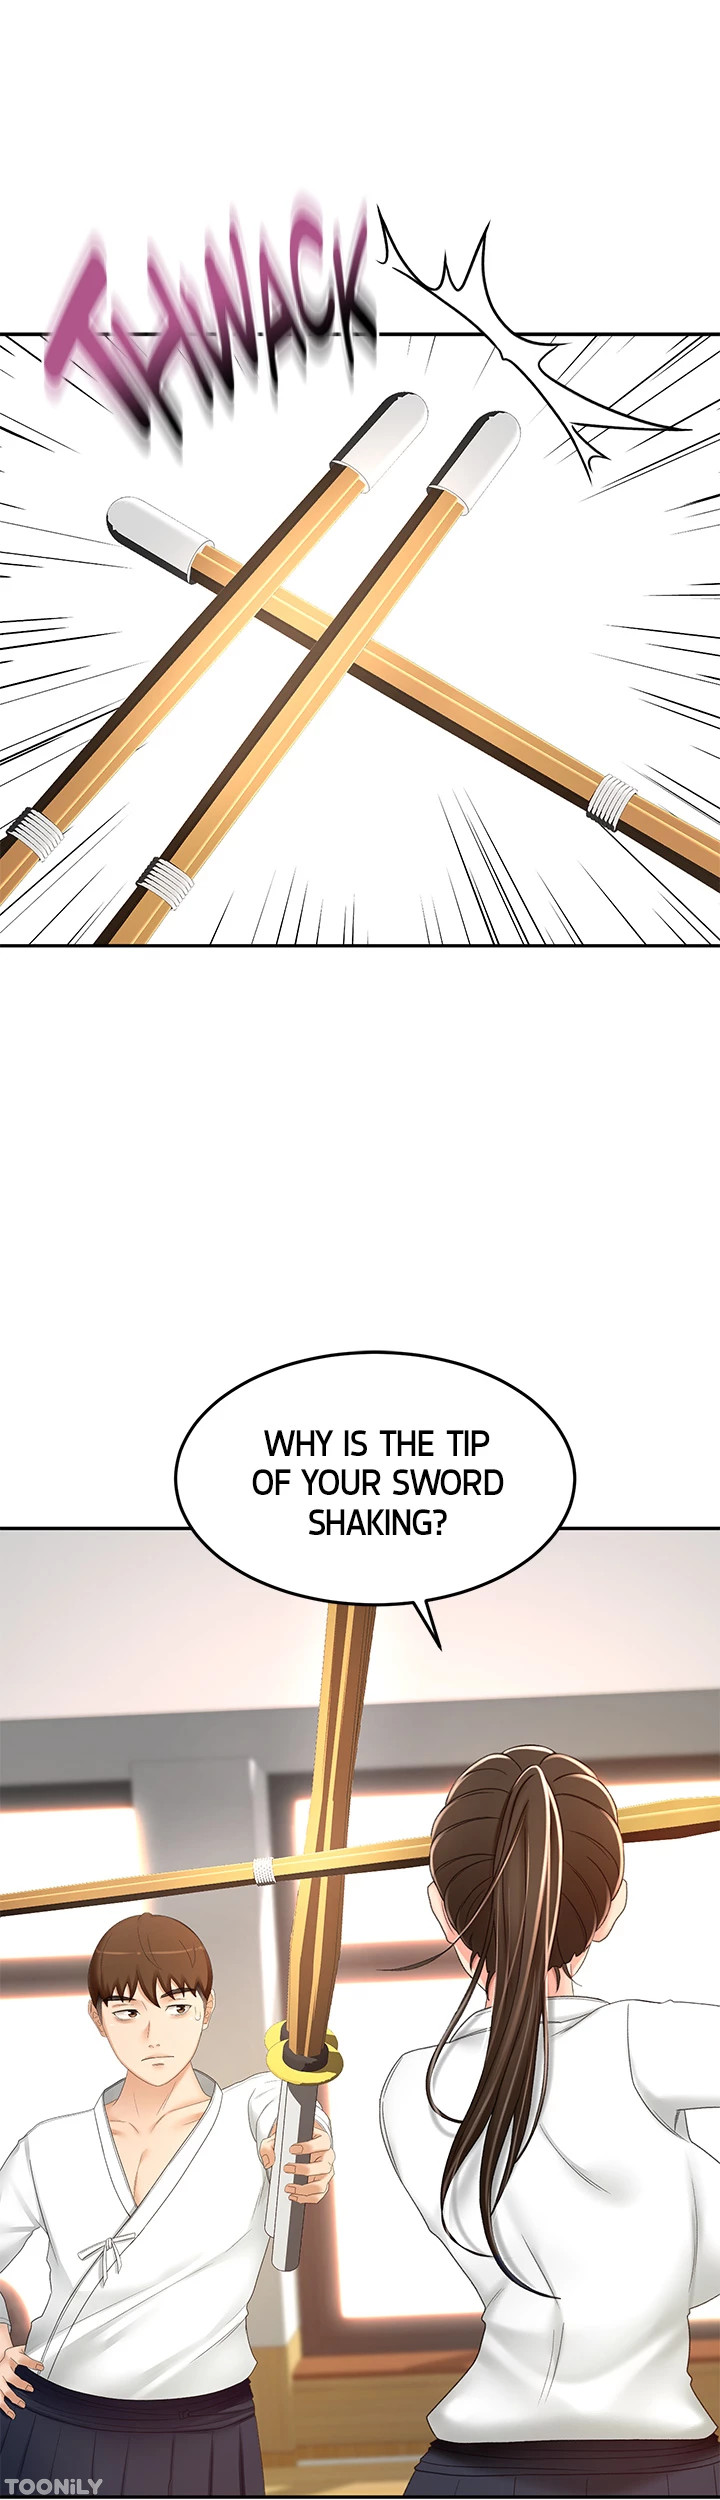 She is Working Out - Chapter 72 Page 7